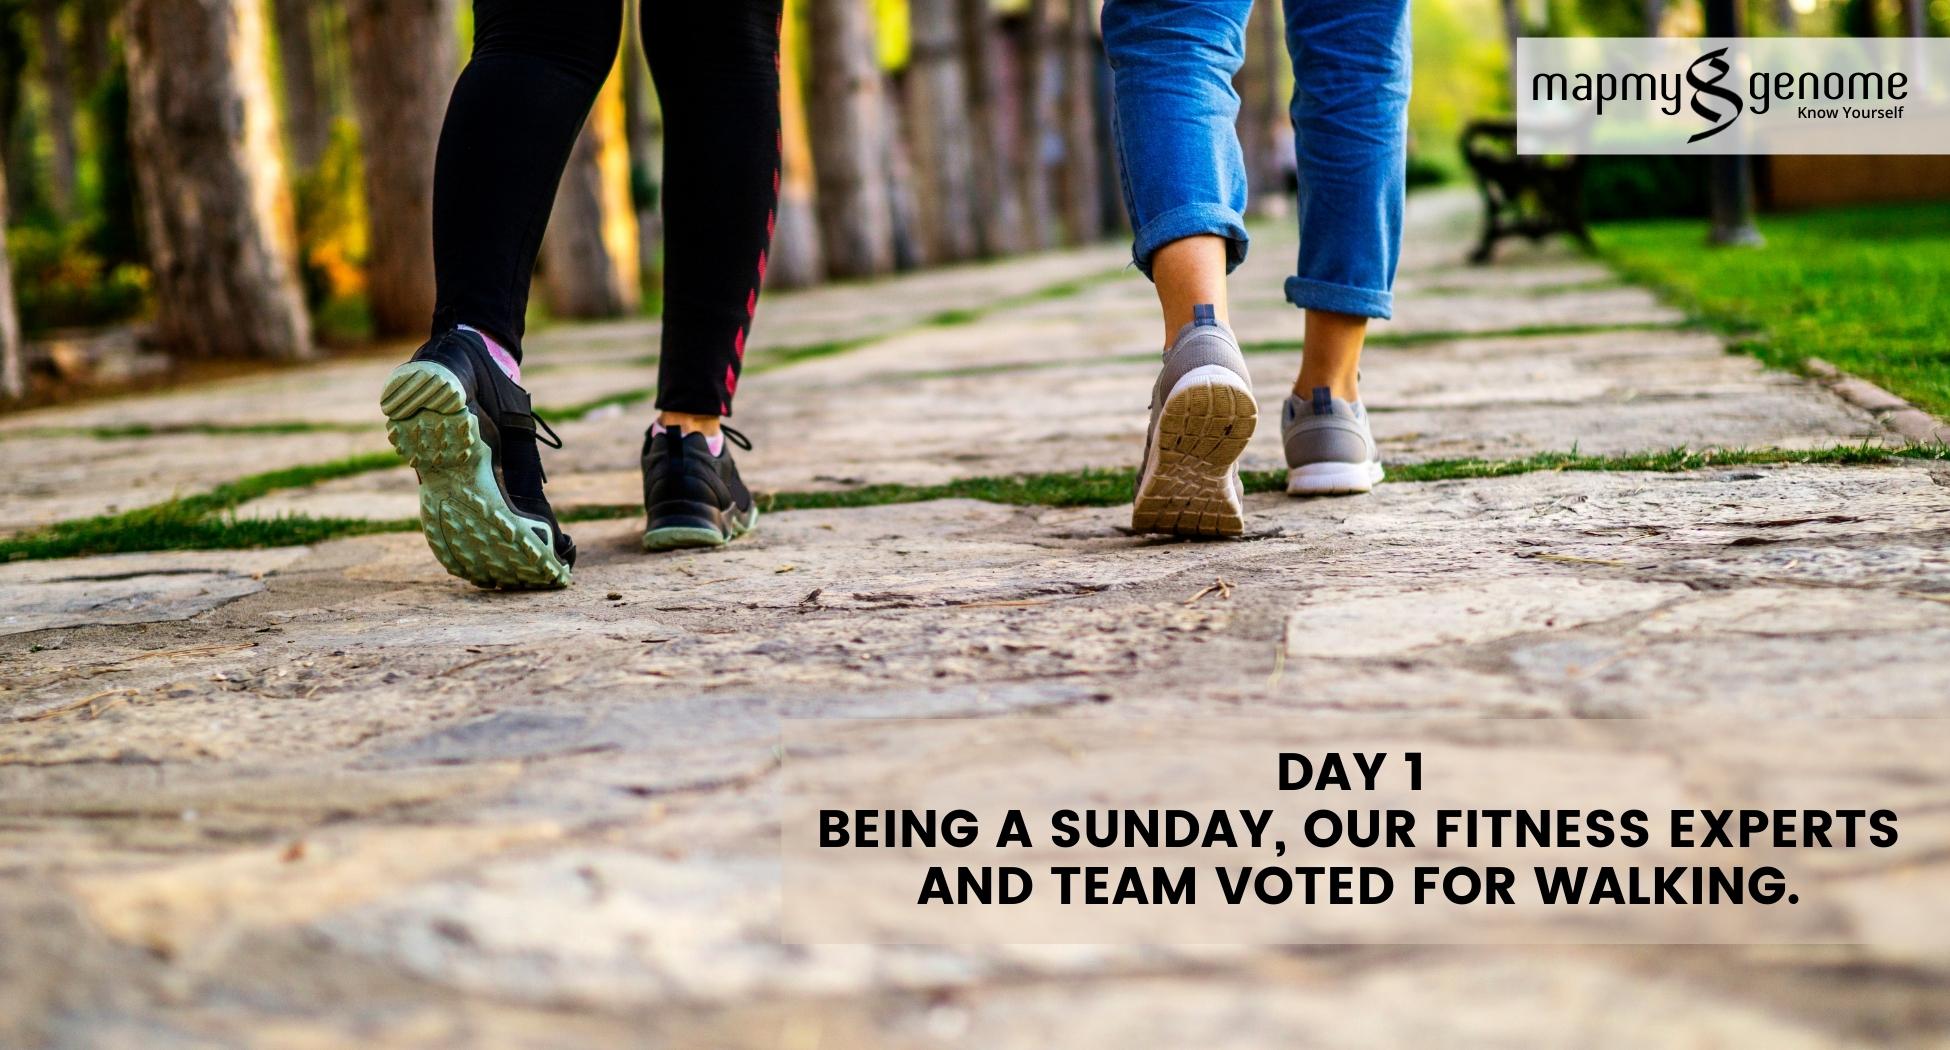 Day 1 being a Sunday, our fitness experts and team voted for walking.